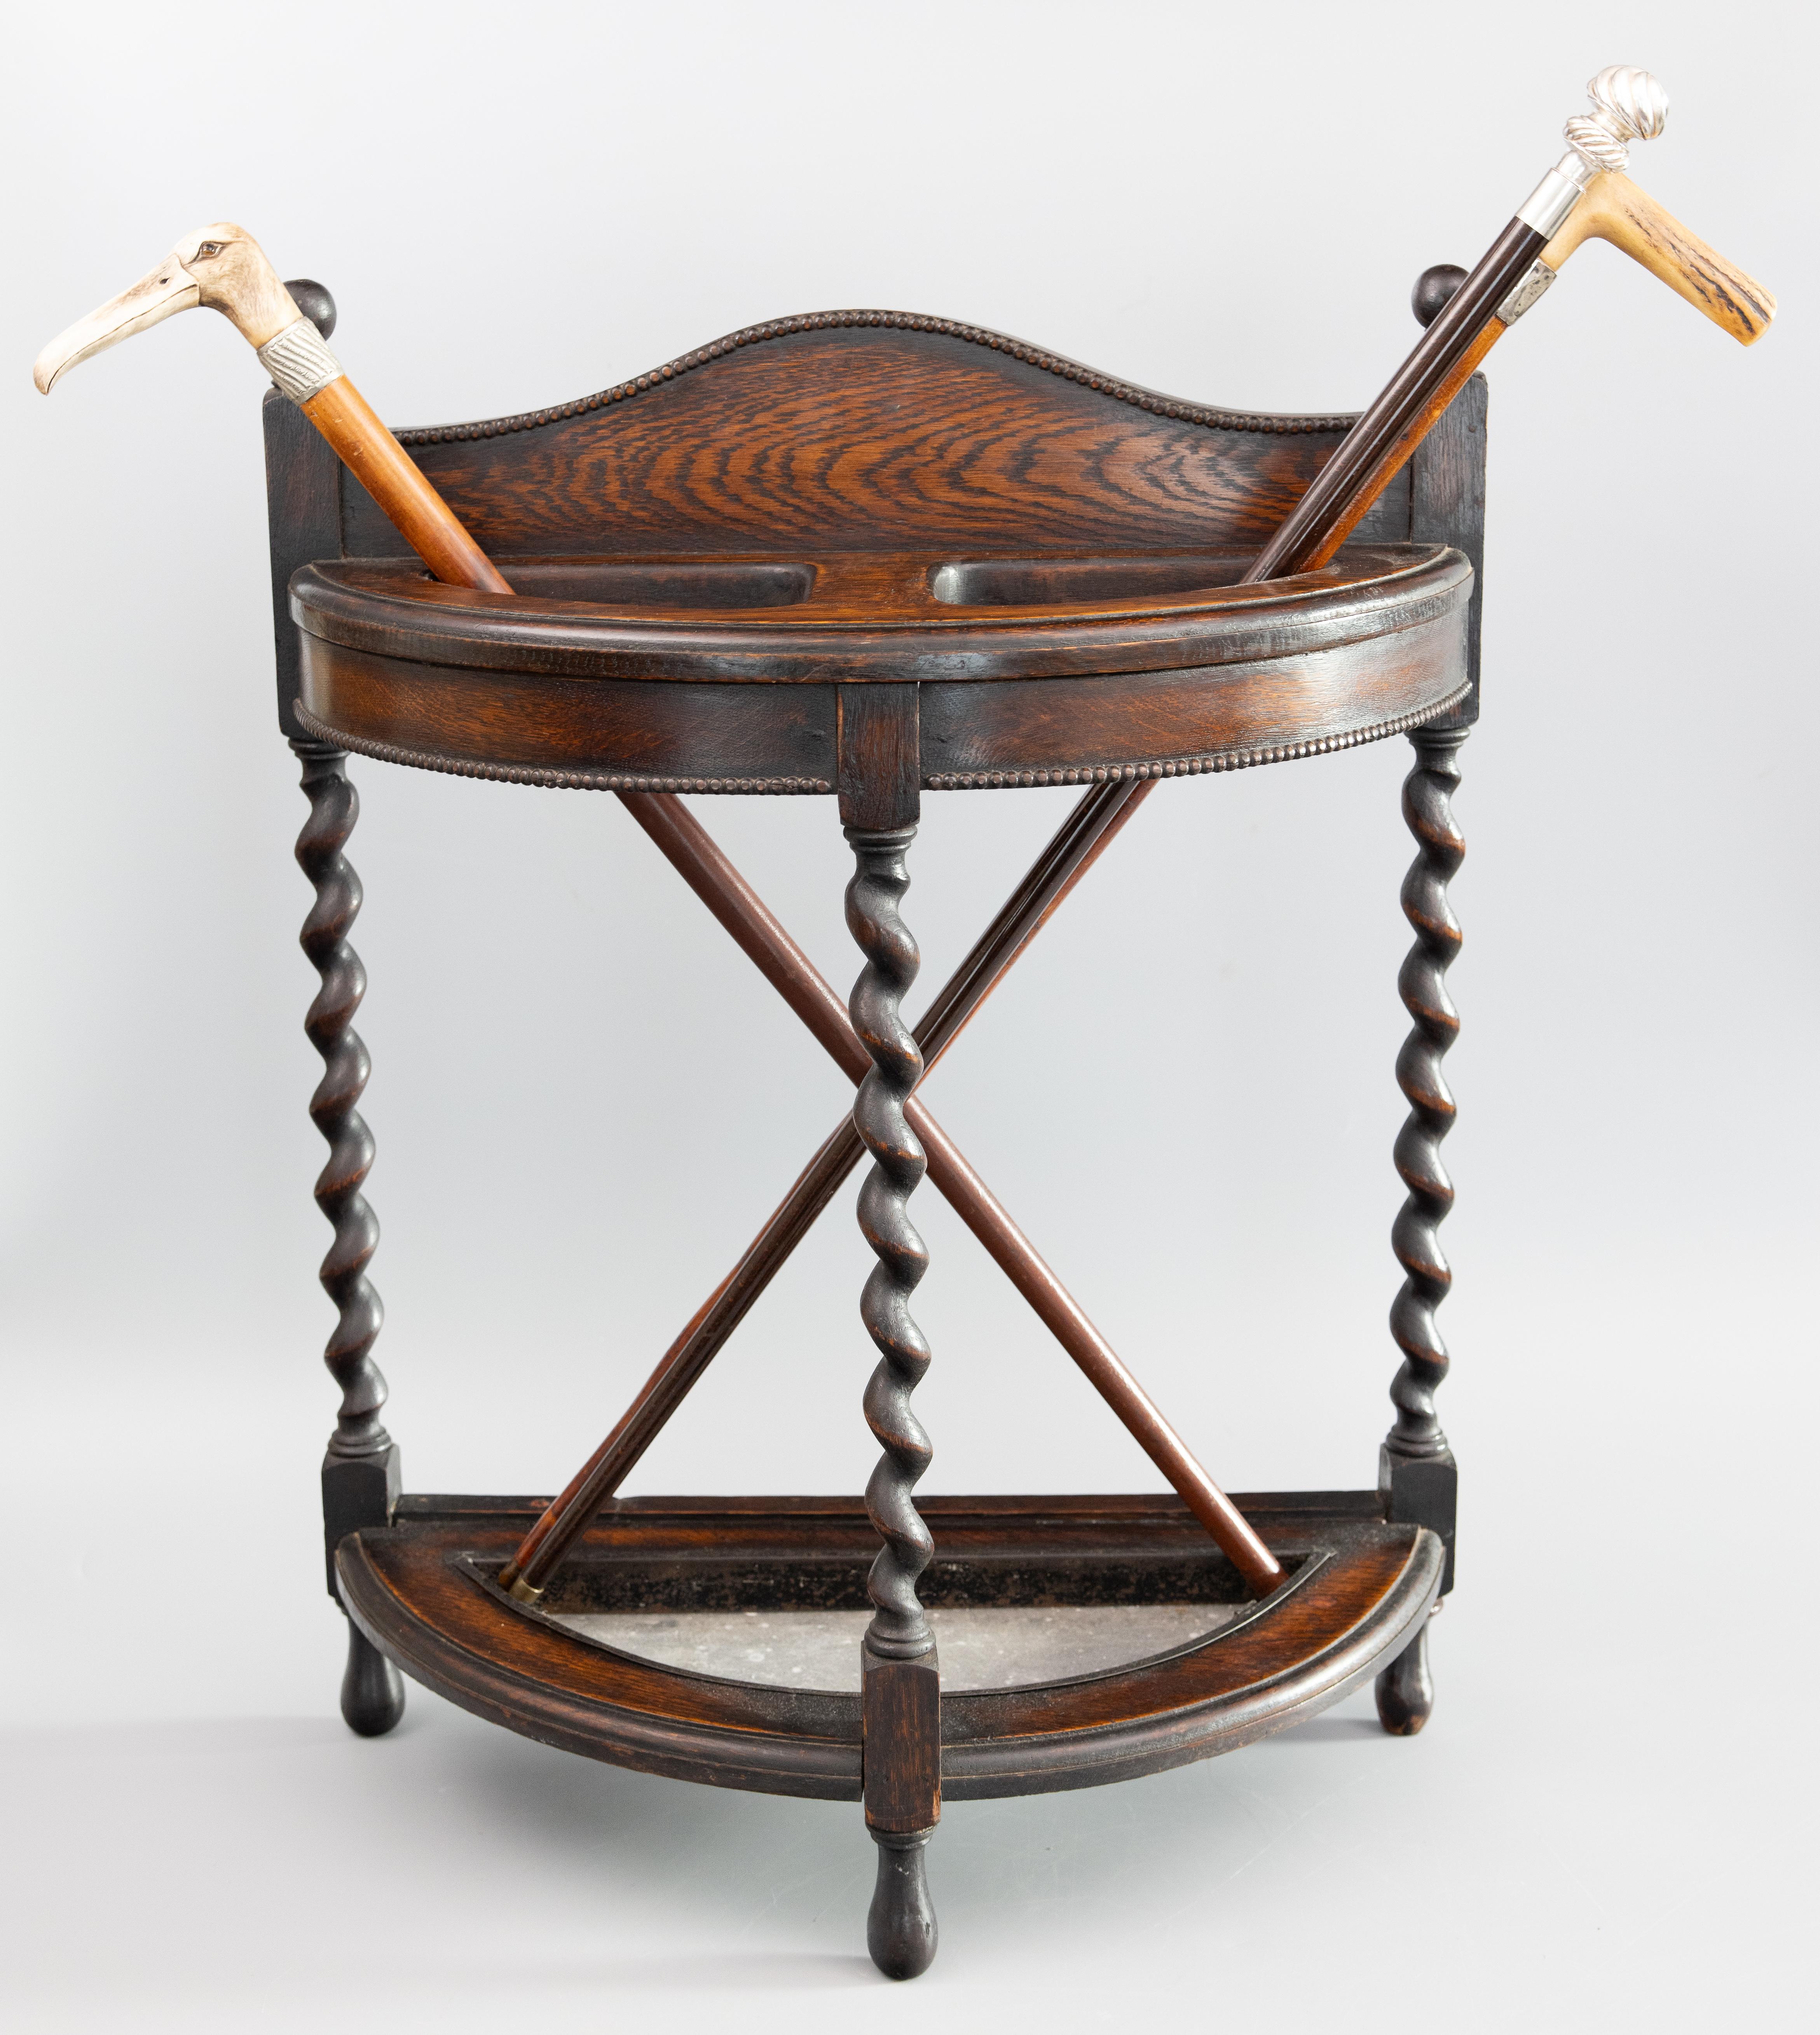 A superb antique English Edwardian oak umbrella or stick stand with hand turned barely twist legs and original drip pan tin liner, circa 1910. This fine quality umbrella stand has a wonderful demi-lune design with beaded trim and would be perfect in